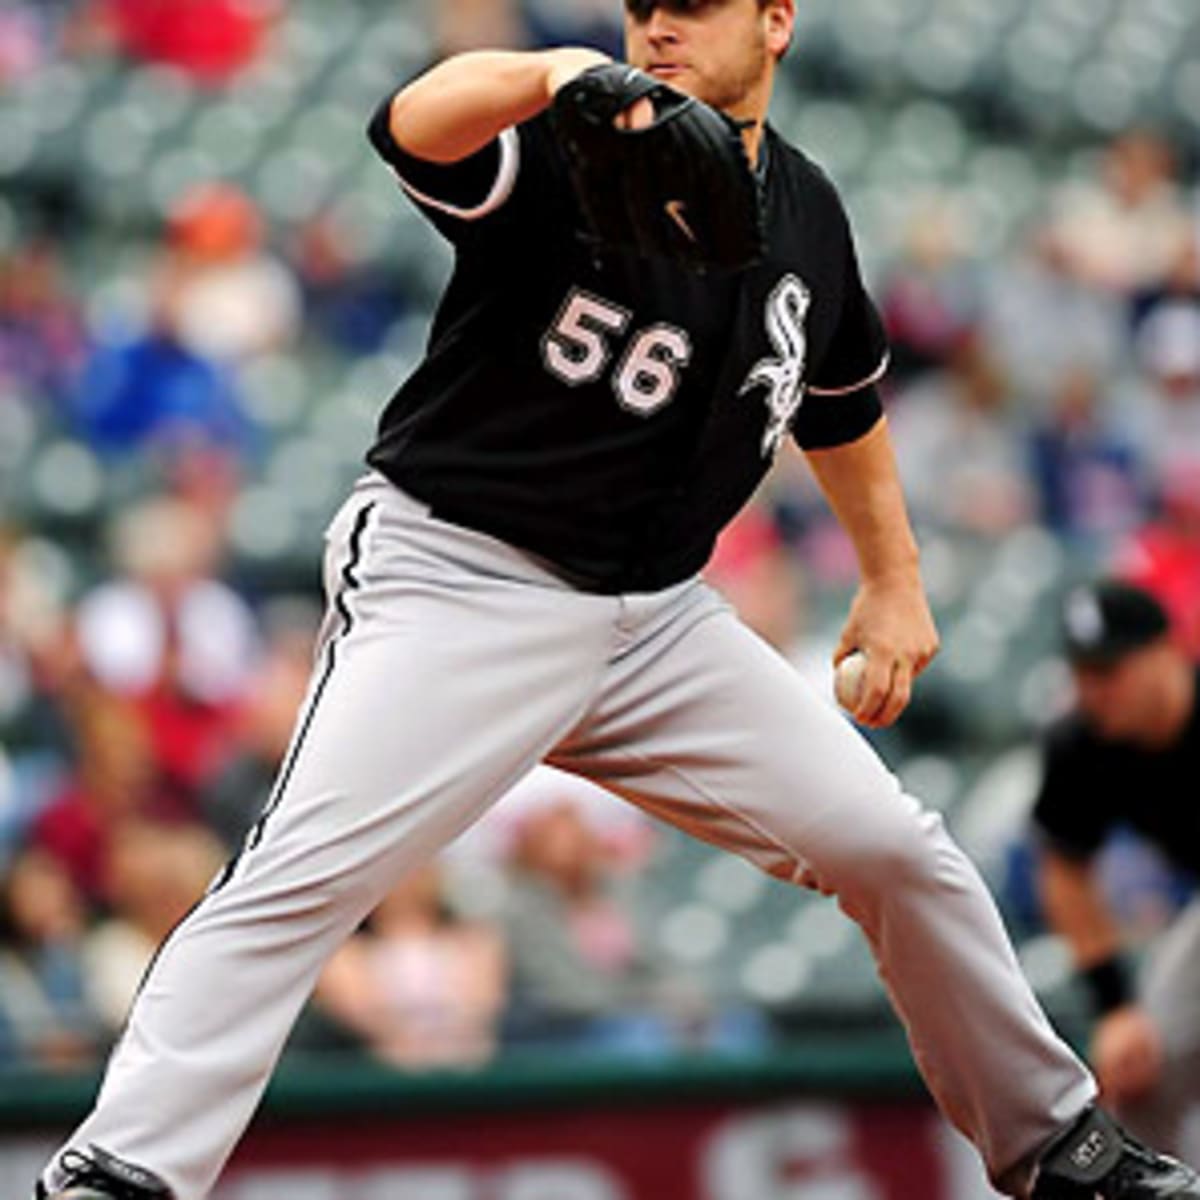 Jonah Freedman: All that stands between Mark Buehrle and 300 wins